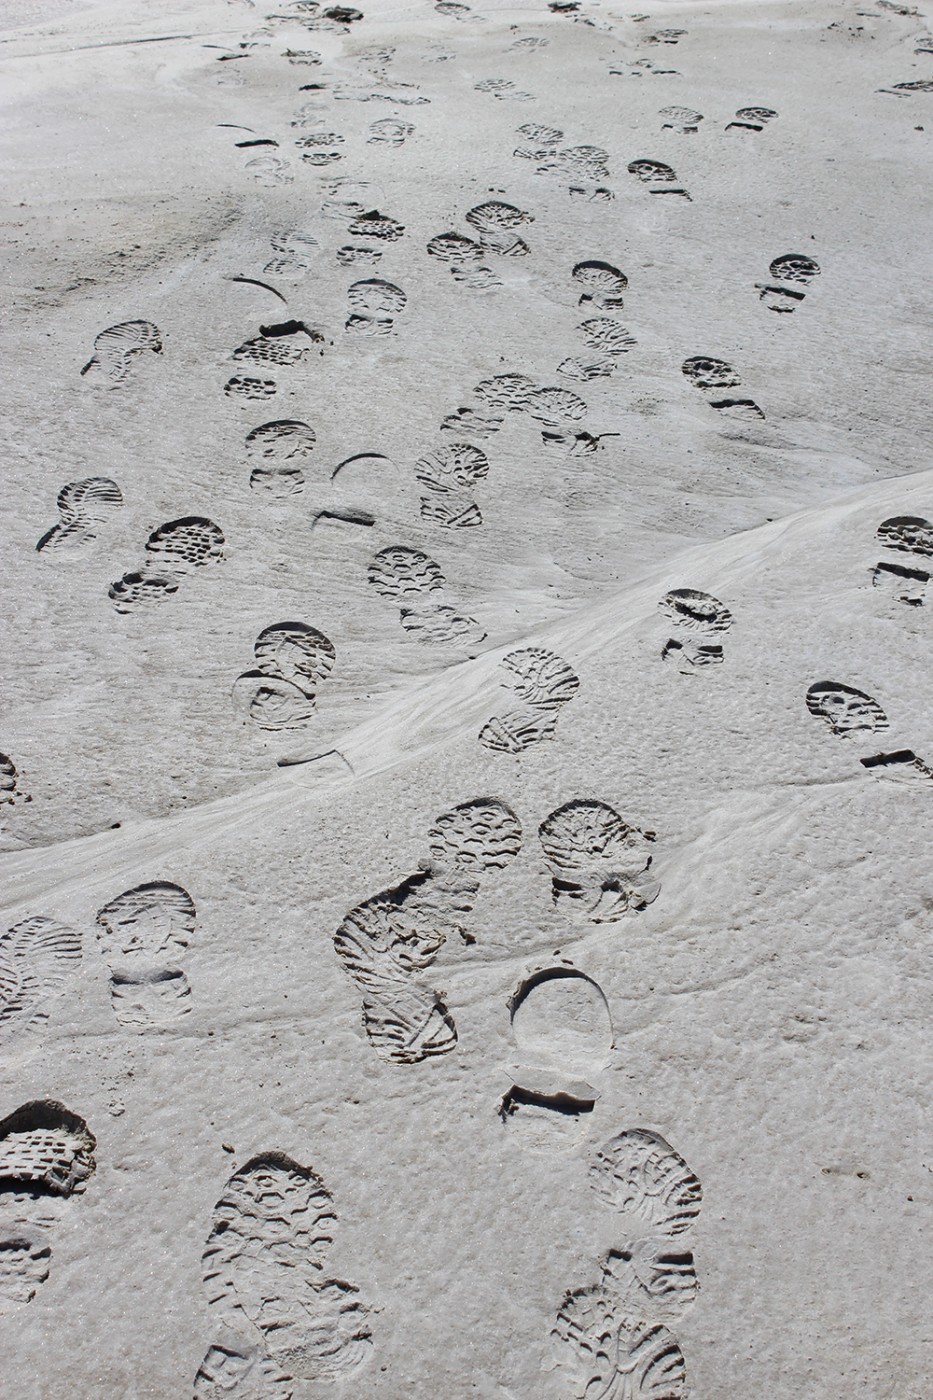 Tracks in the sand: tracking criminals